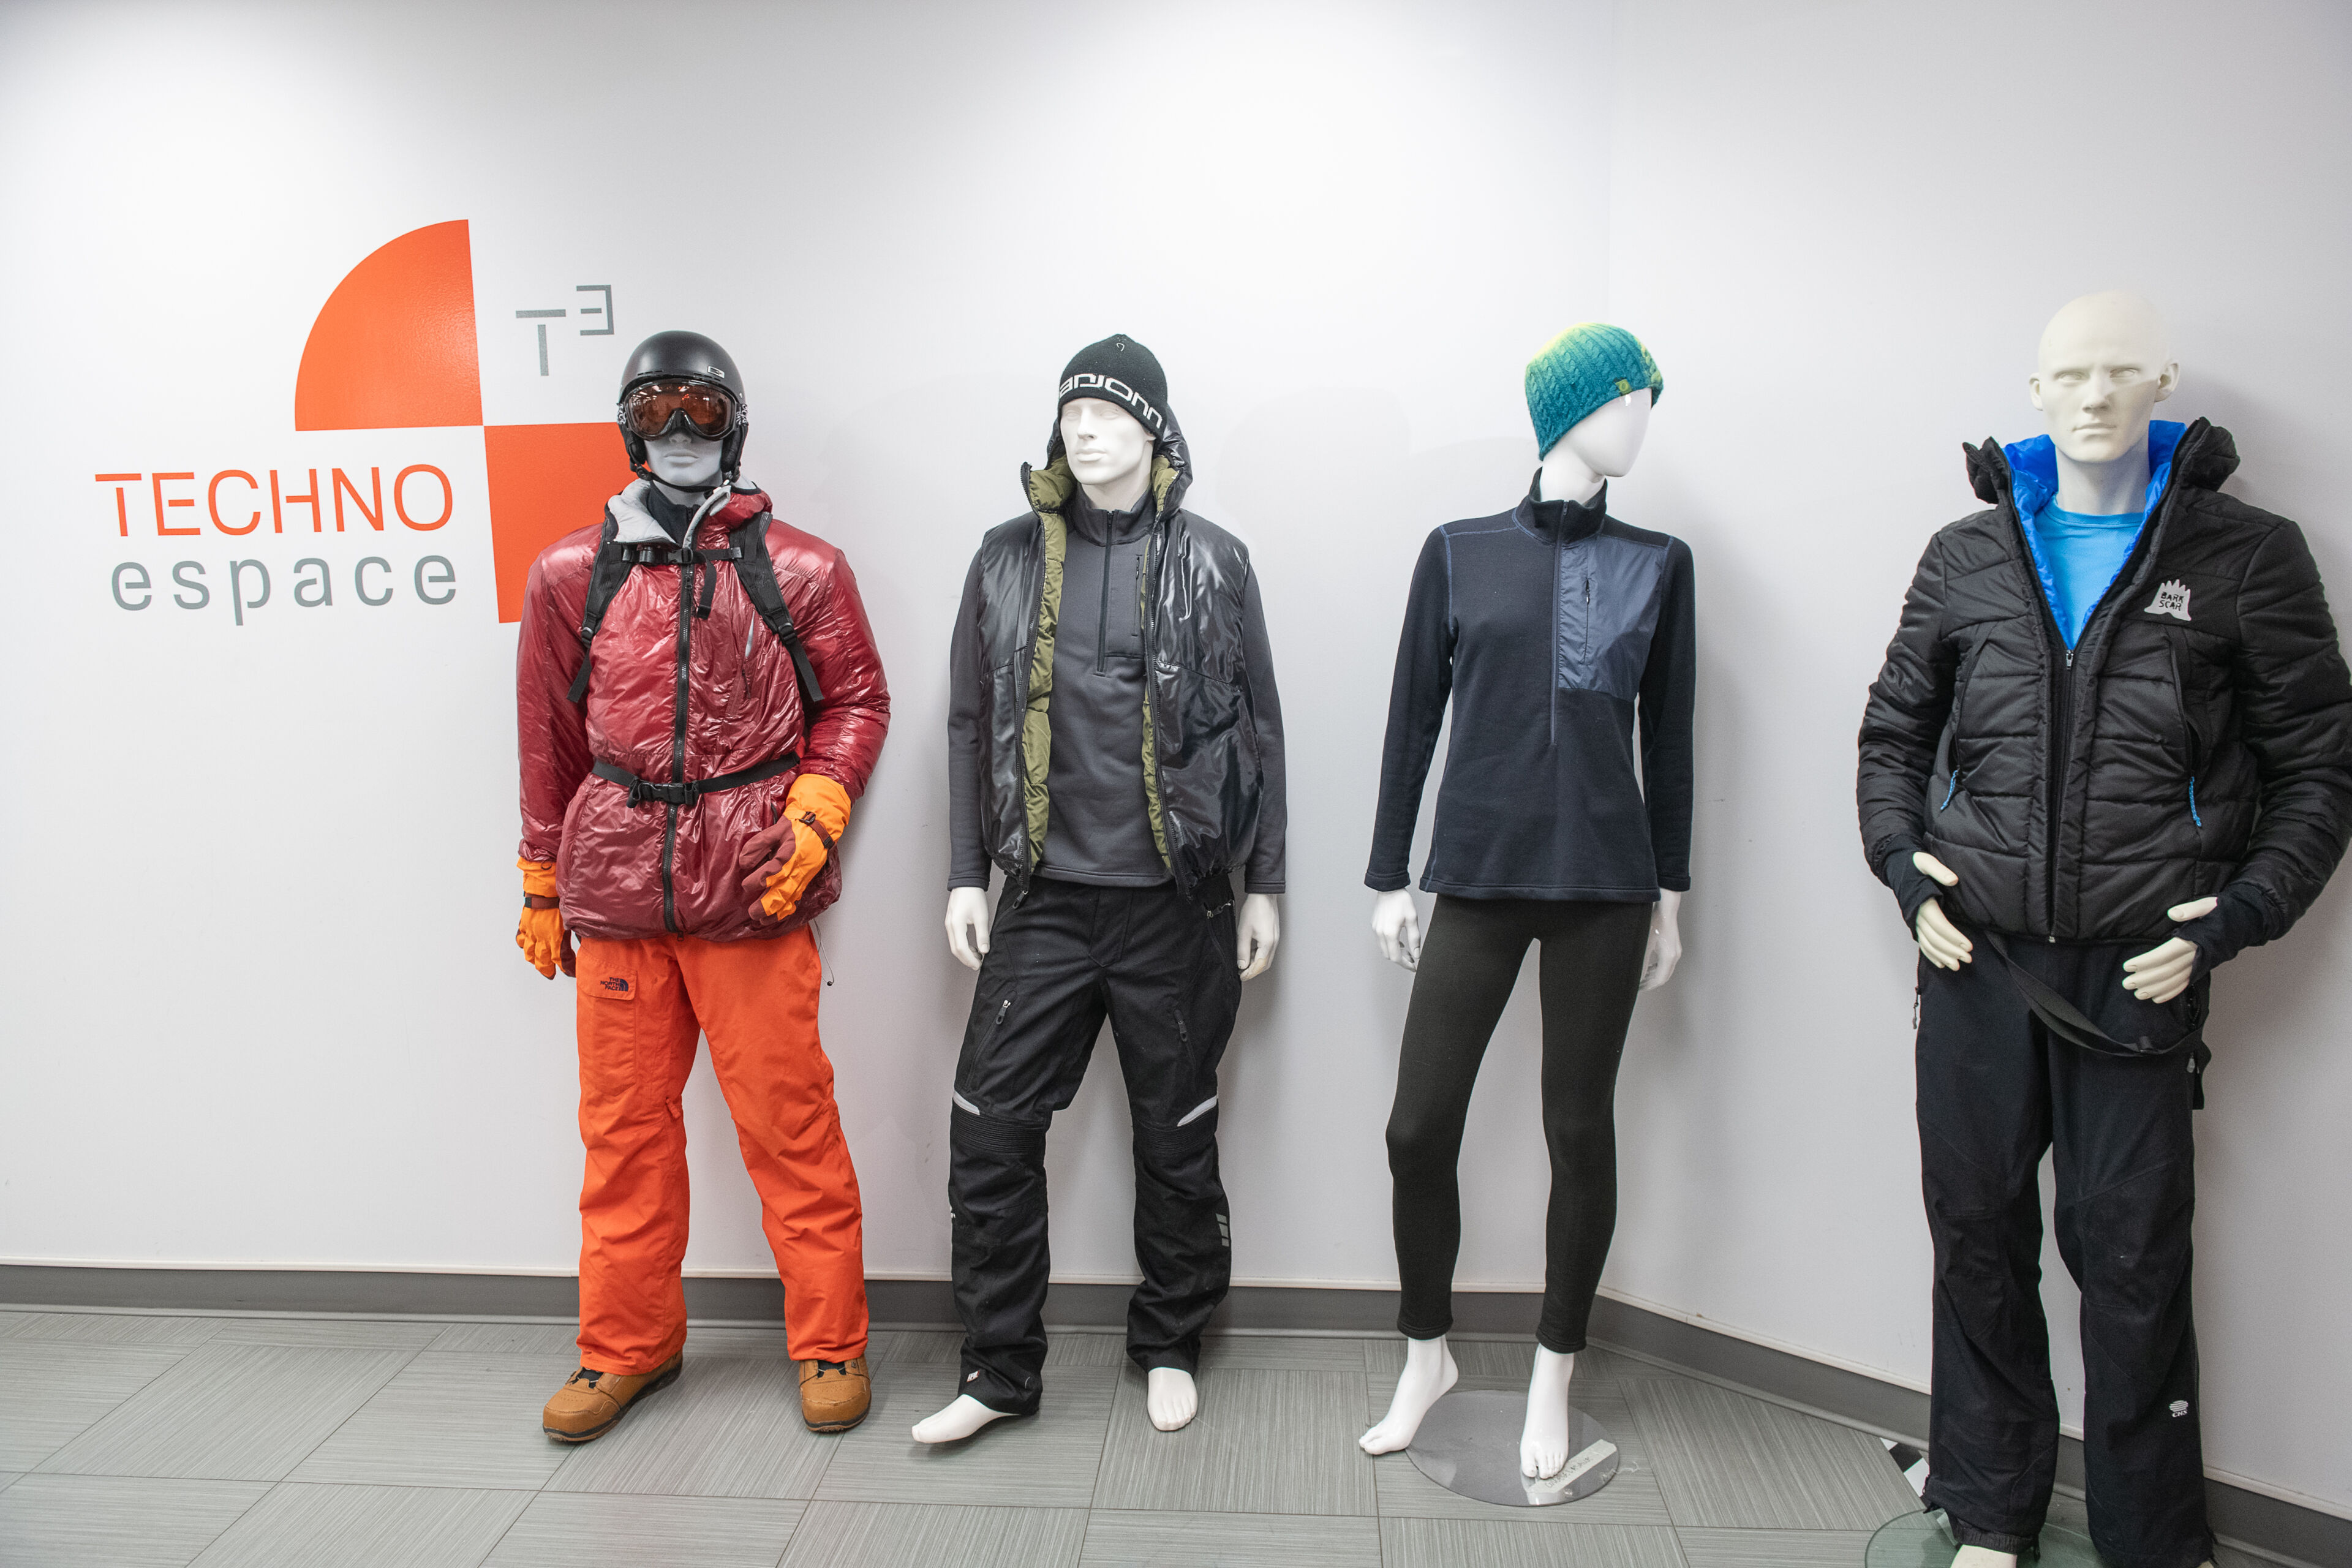 Four mannequins dressed in winter sportswear, including insulated jackets and pants, displayed beside a Techno Espace sign.